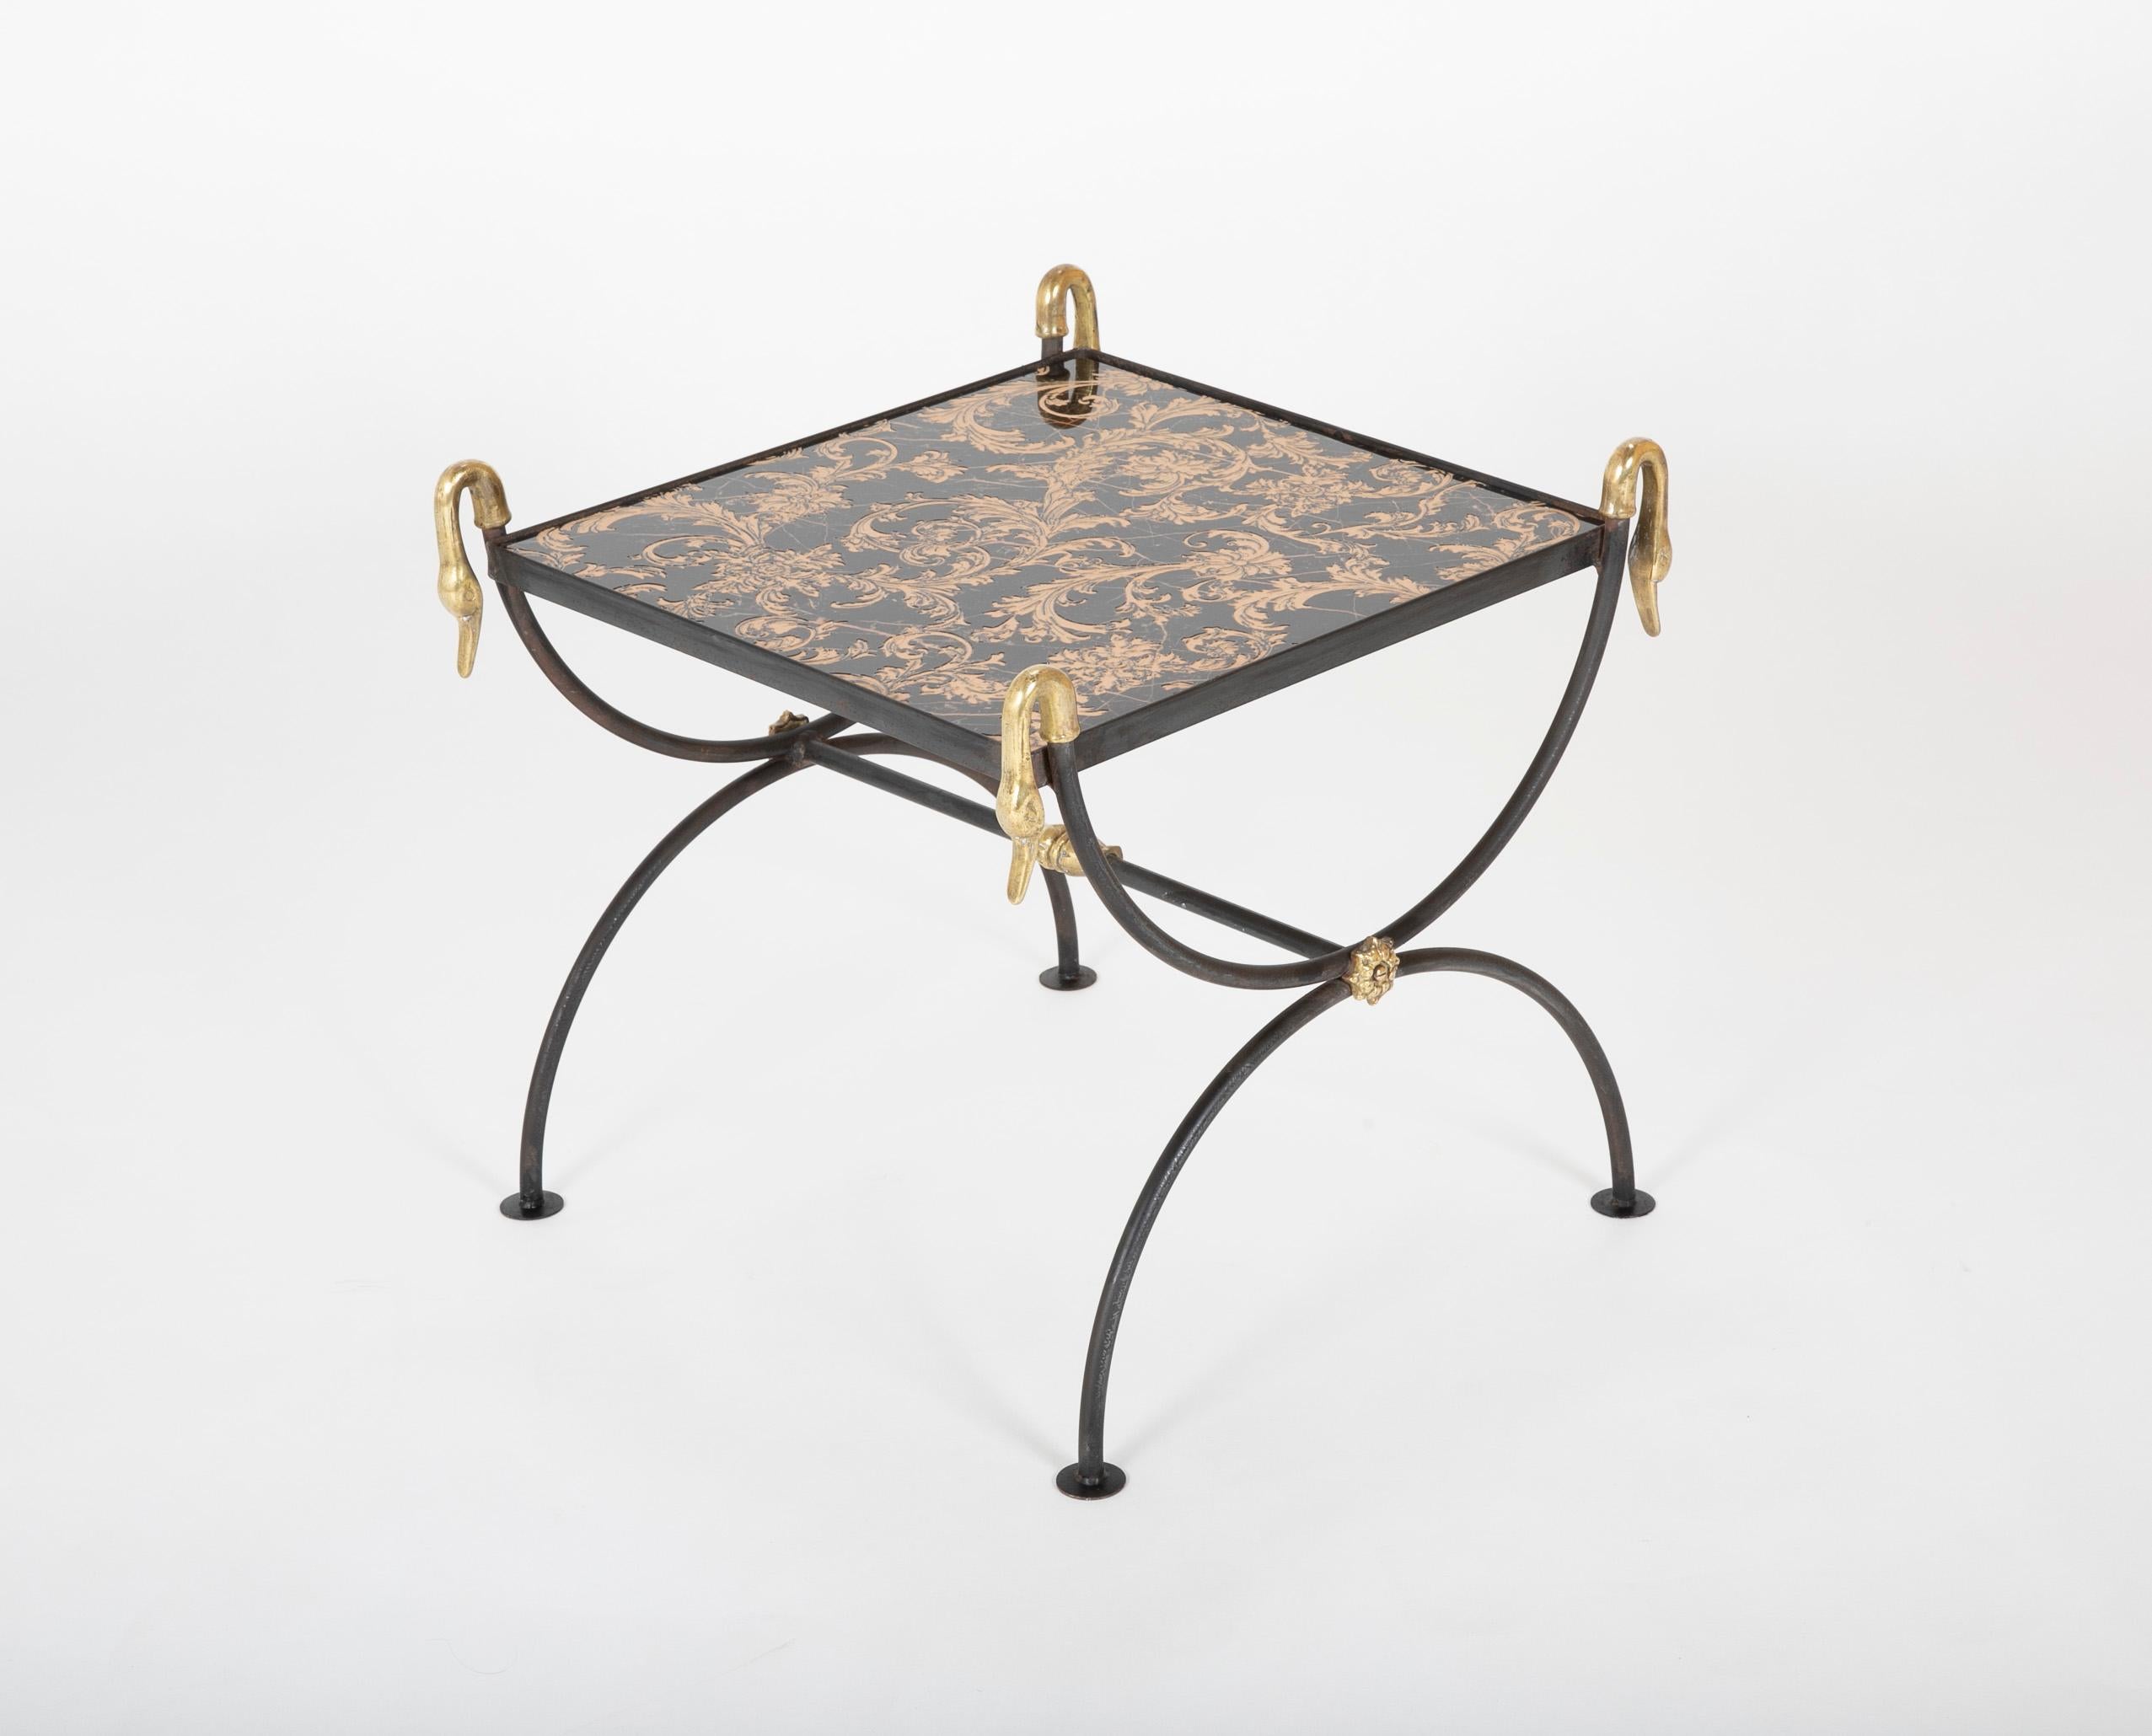 Three Piece Iron and Brass Coffee Table with Versace Insets 12